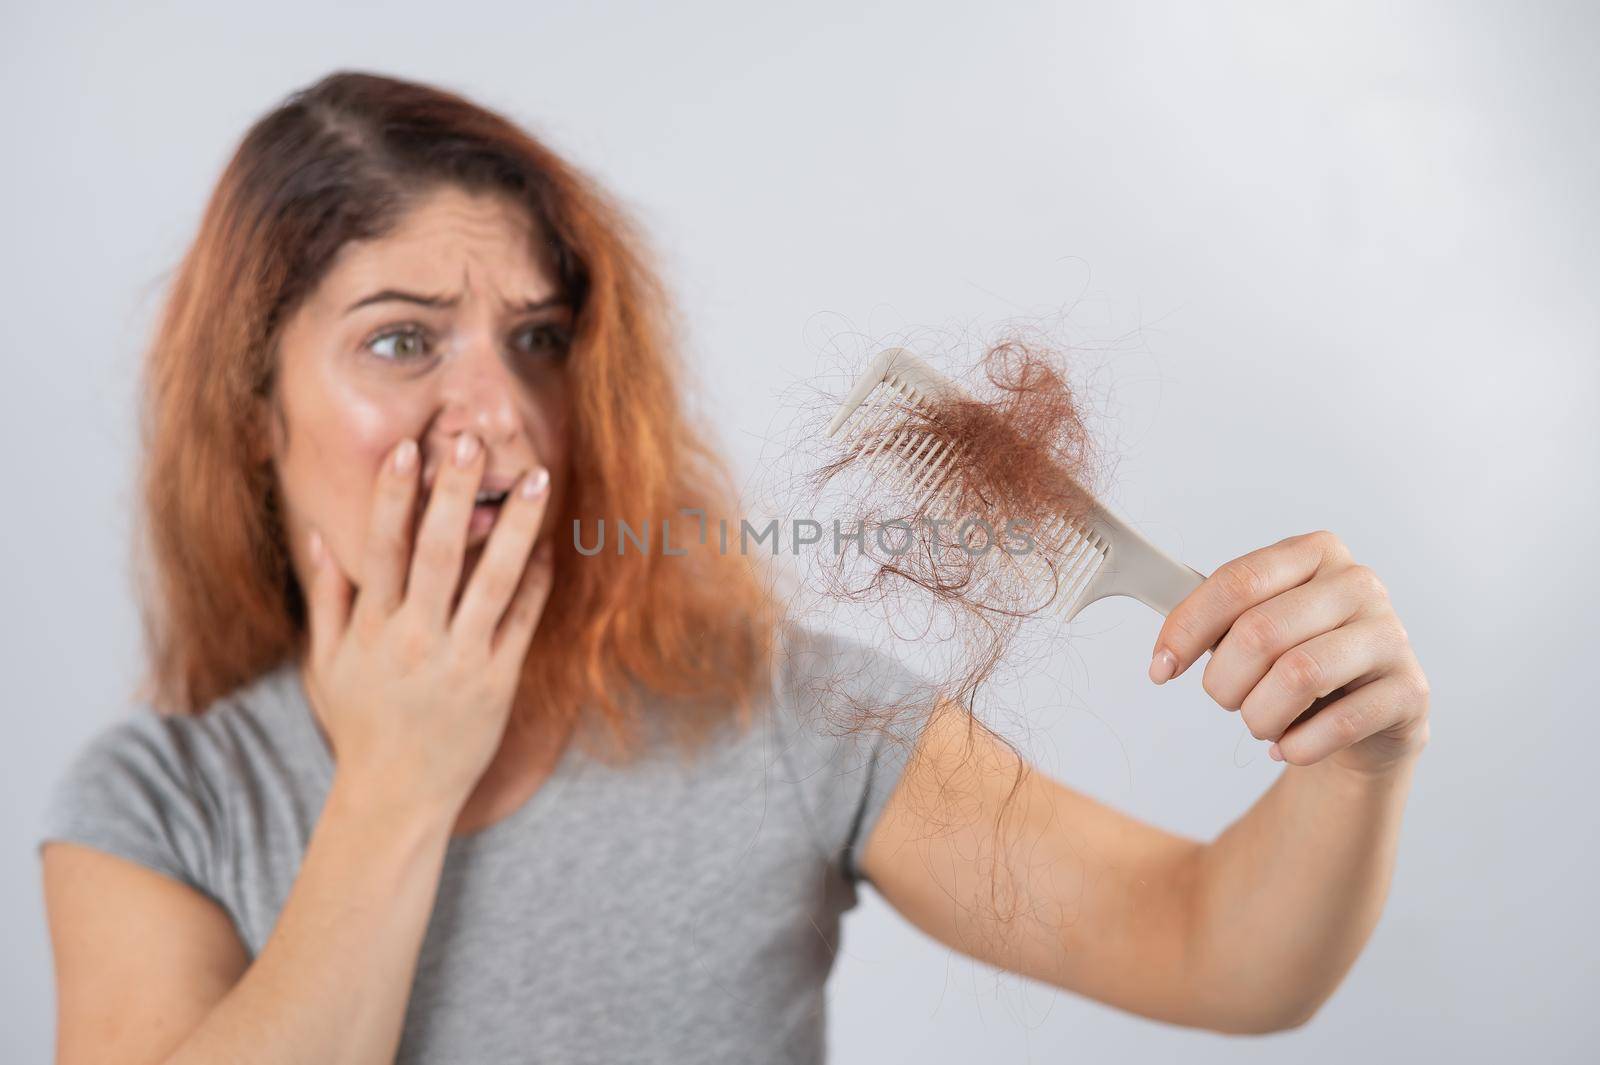 Caucasian woman with a grimace of horror holds a comb with a bun of hair. Hair loss and female alopecia